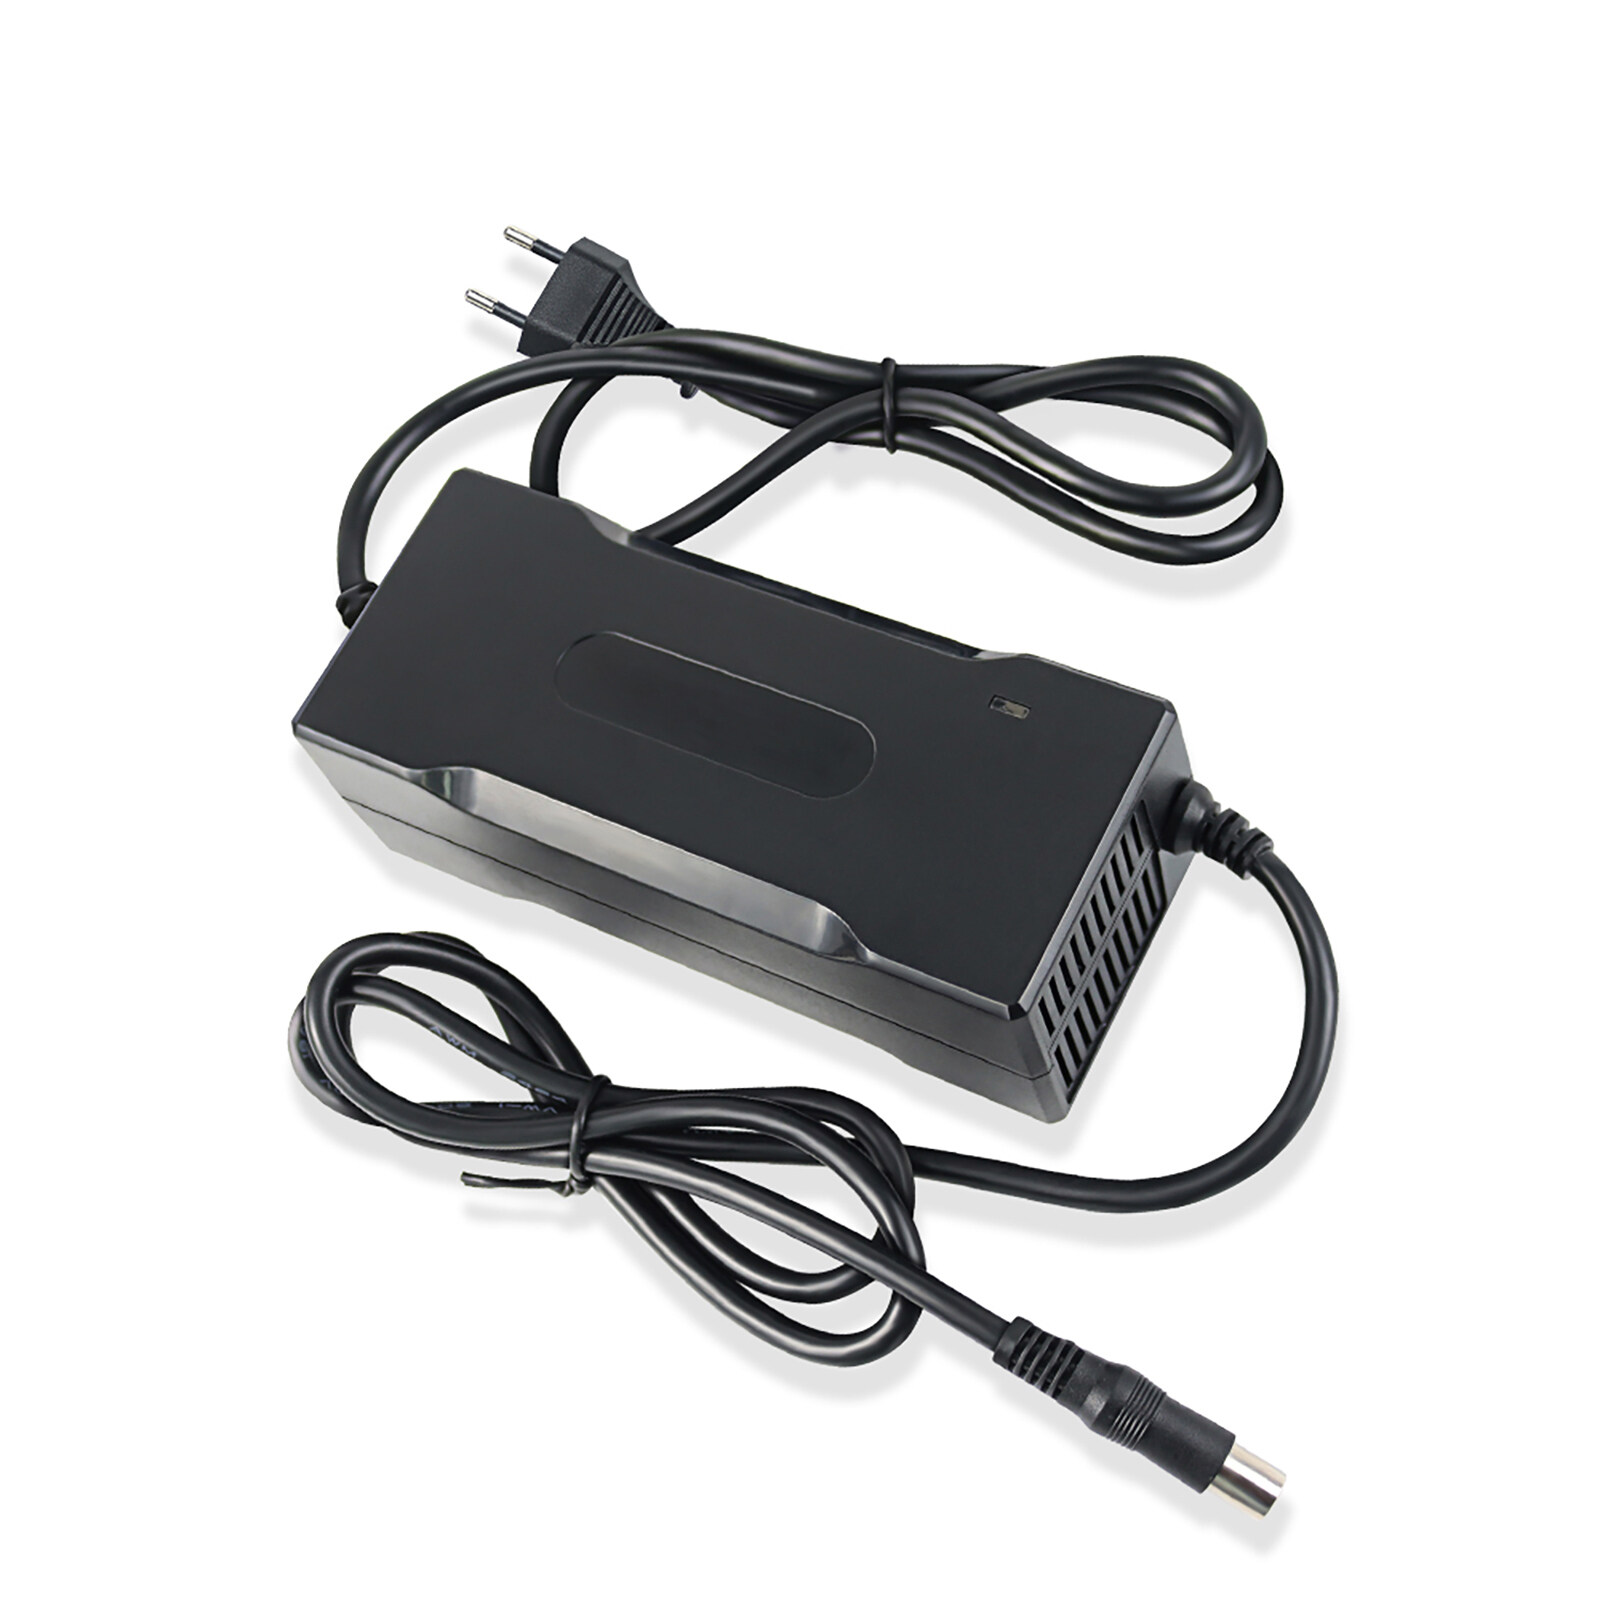 Neexgent DC Port 29.2V 2A Charger 29.2V LiFePO4 Battery Charger For 8S 24V LFP Battery Pack